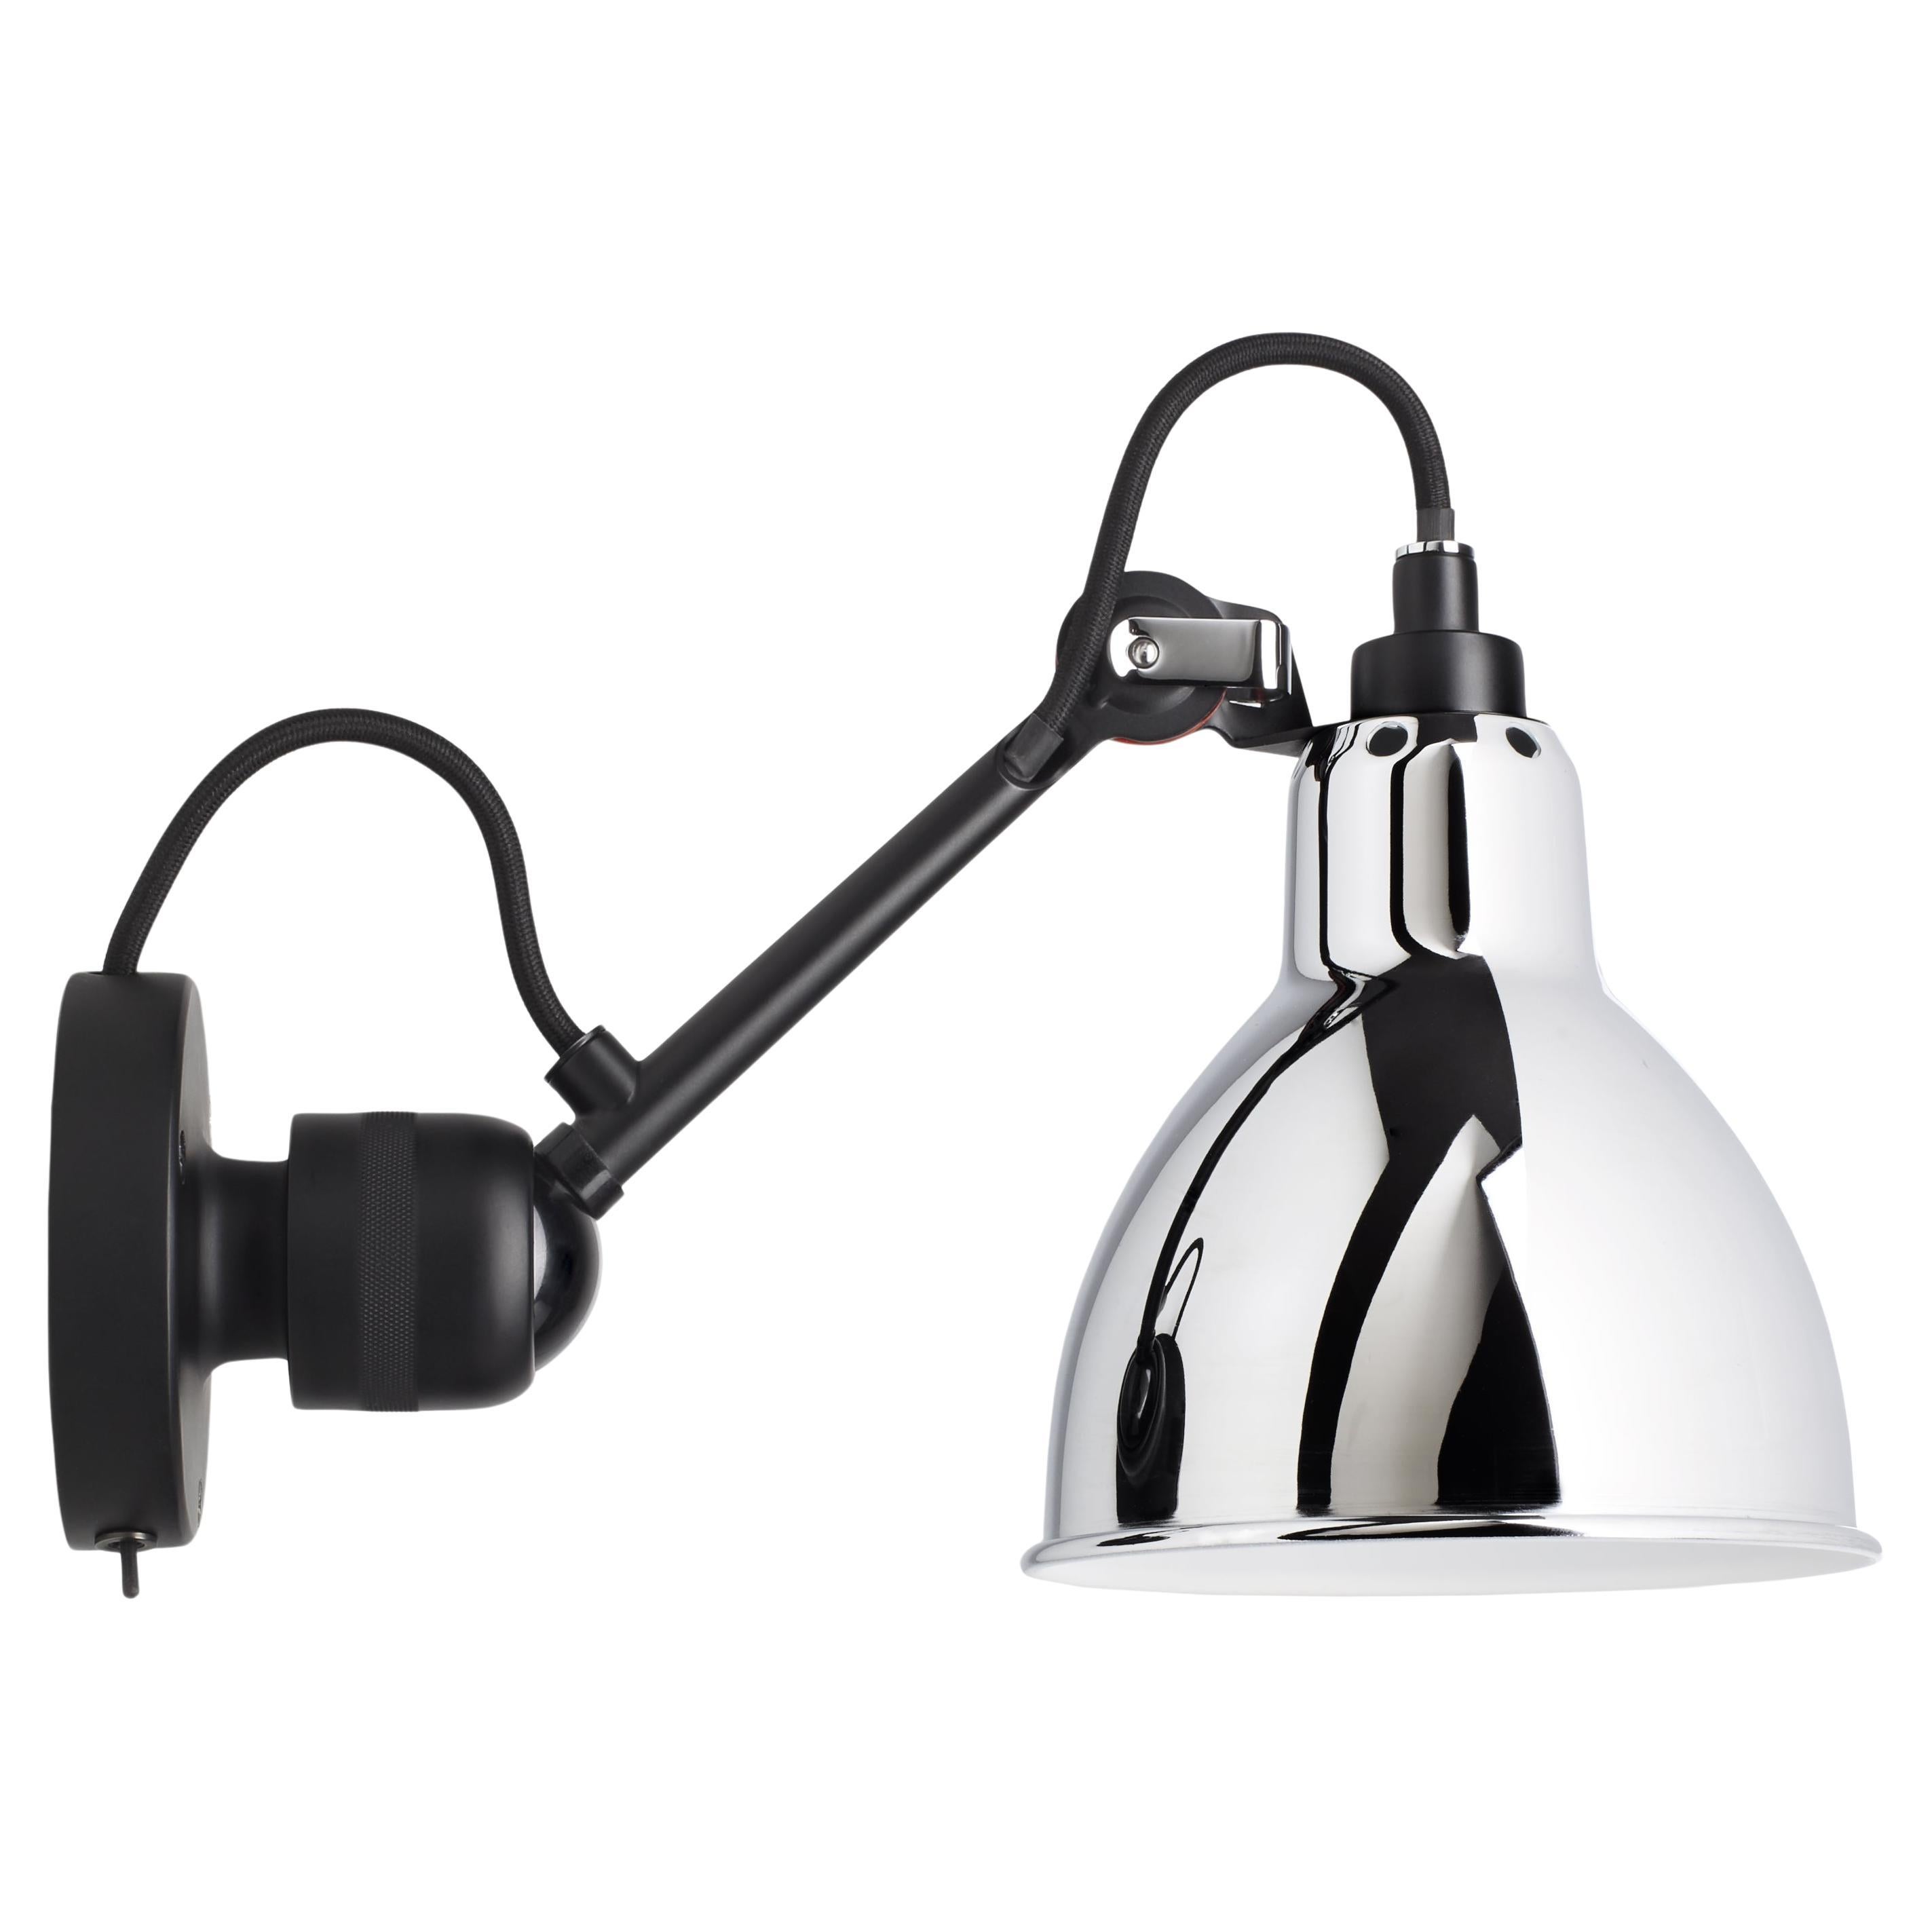 DCW Editions La Lampe Gras N°304 SW Wall Lamp in Black Arm and Chrome Shade For Sale